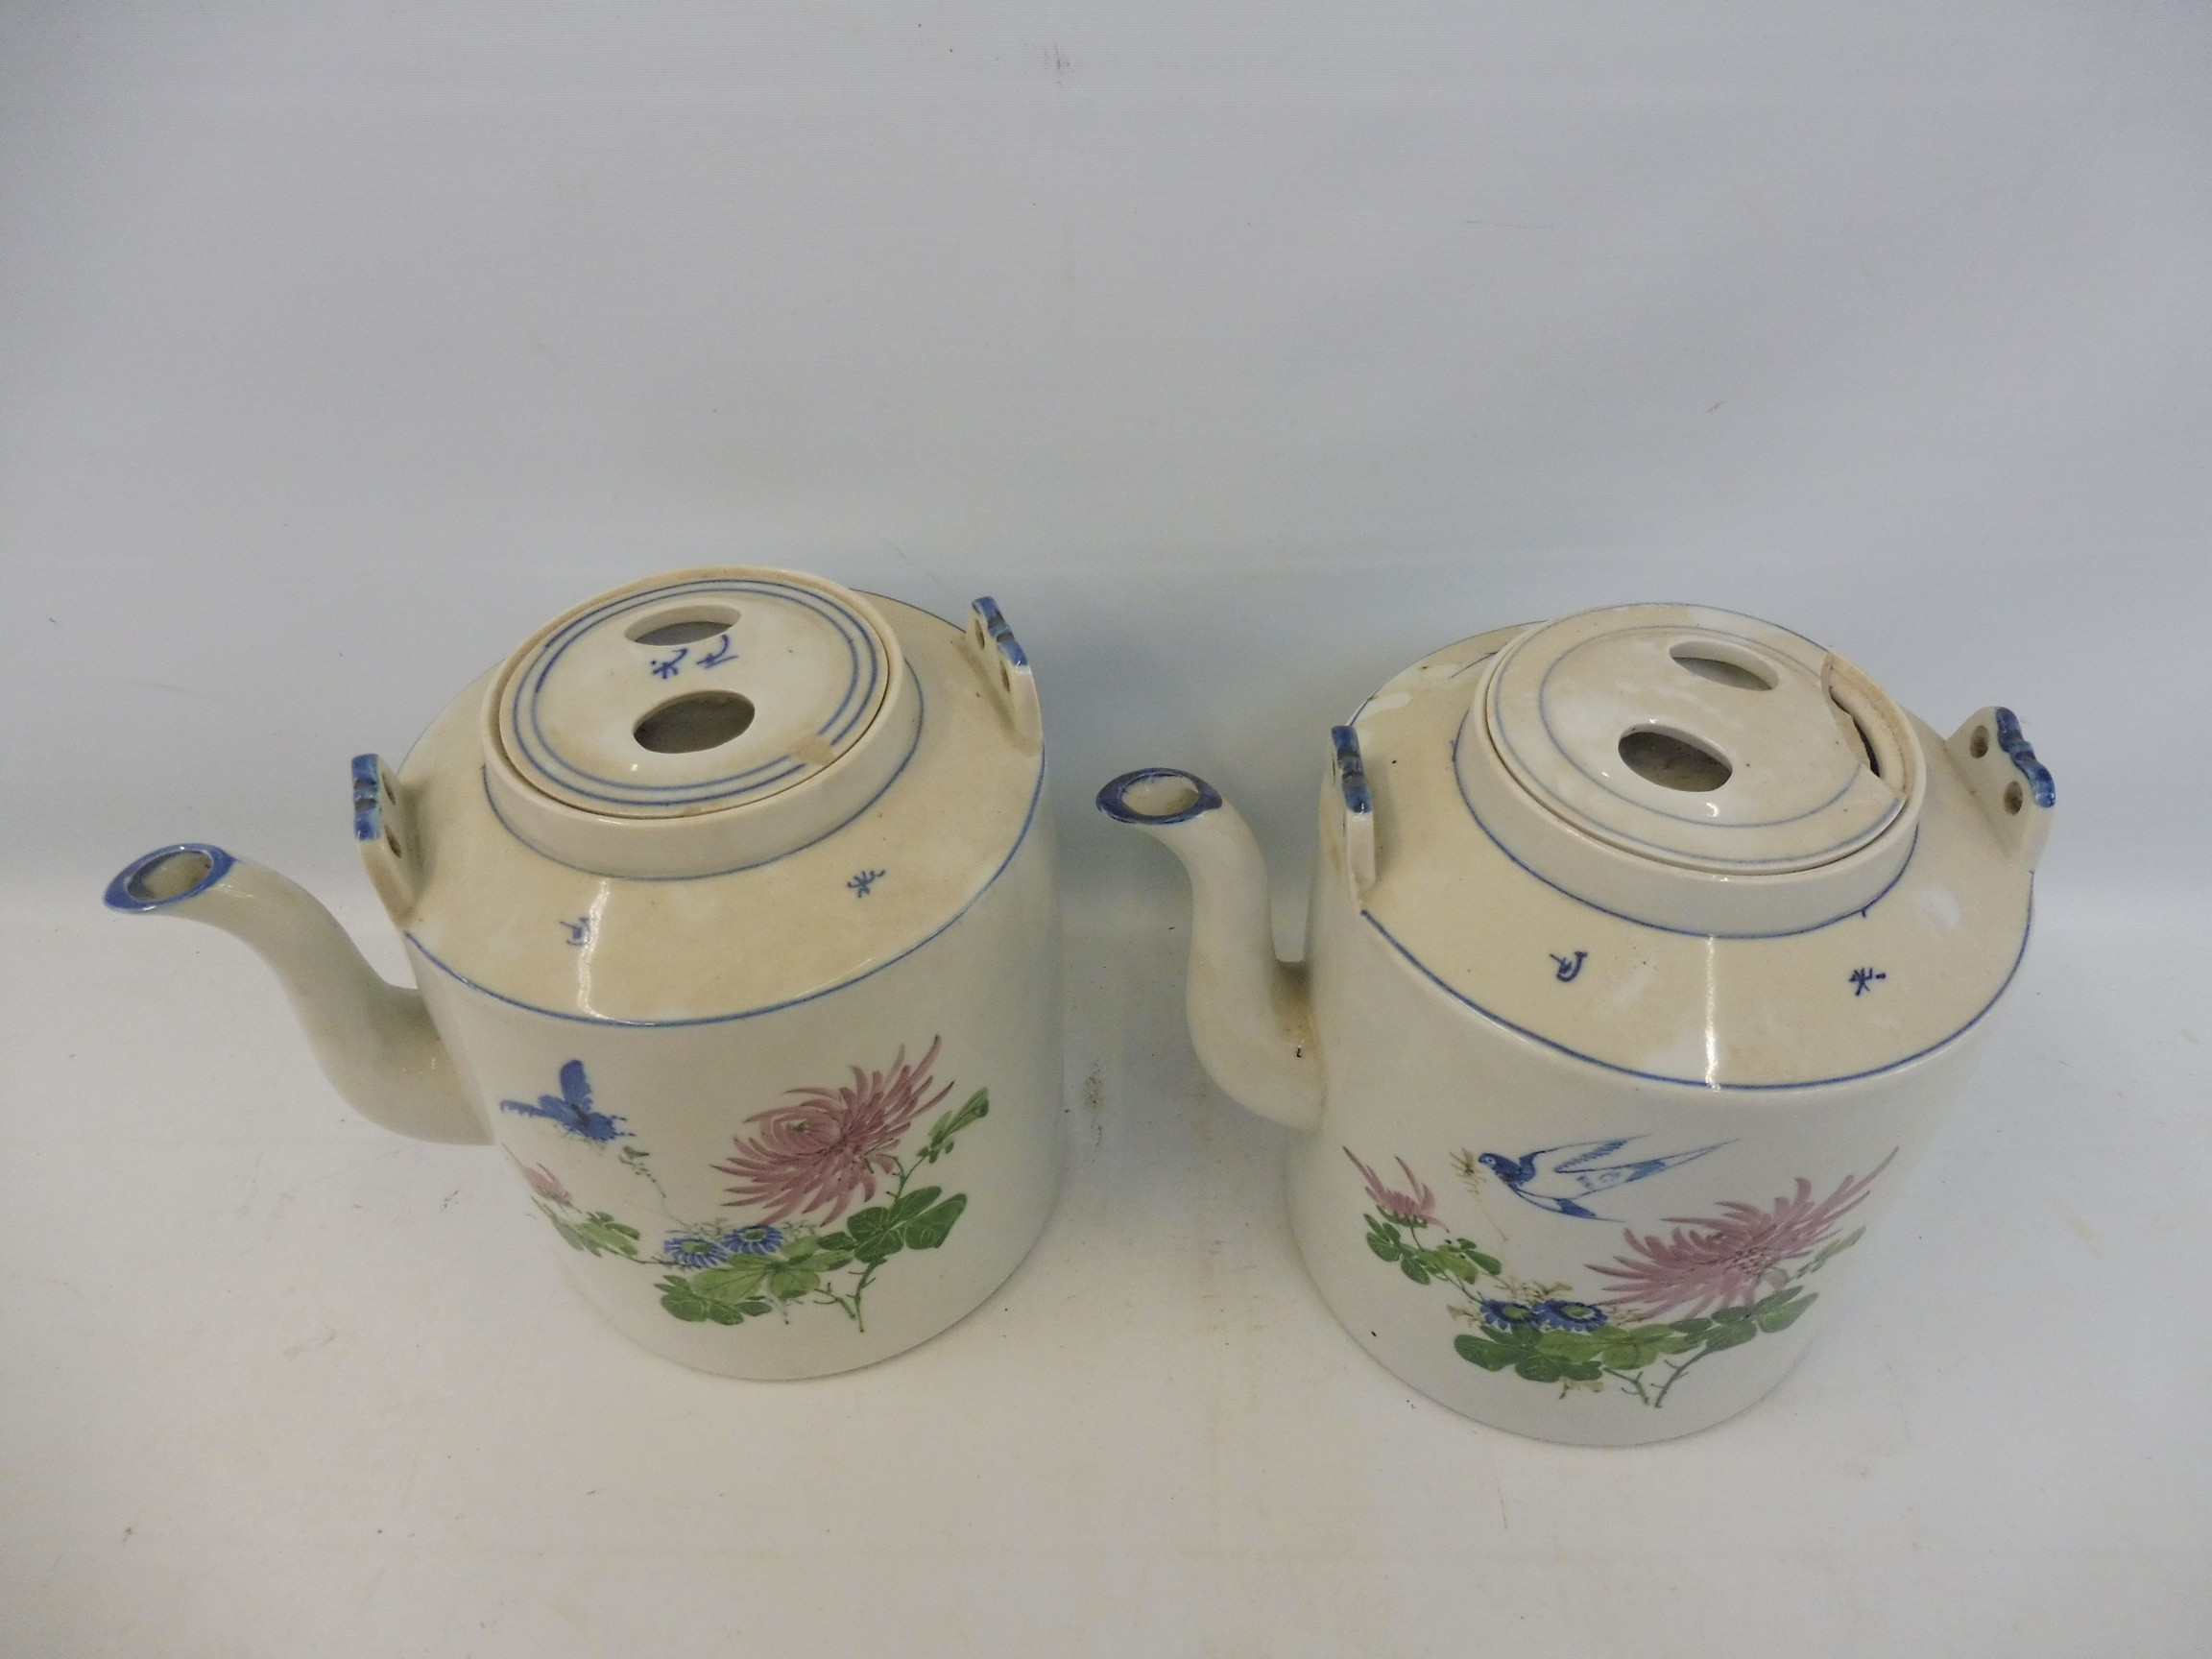 A pair of Chinese Canton teapots decorated with flowers and birds in flight, 7 3/4" high. - Image 2 of 4